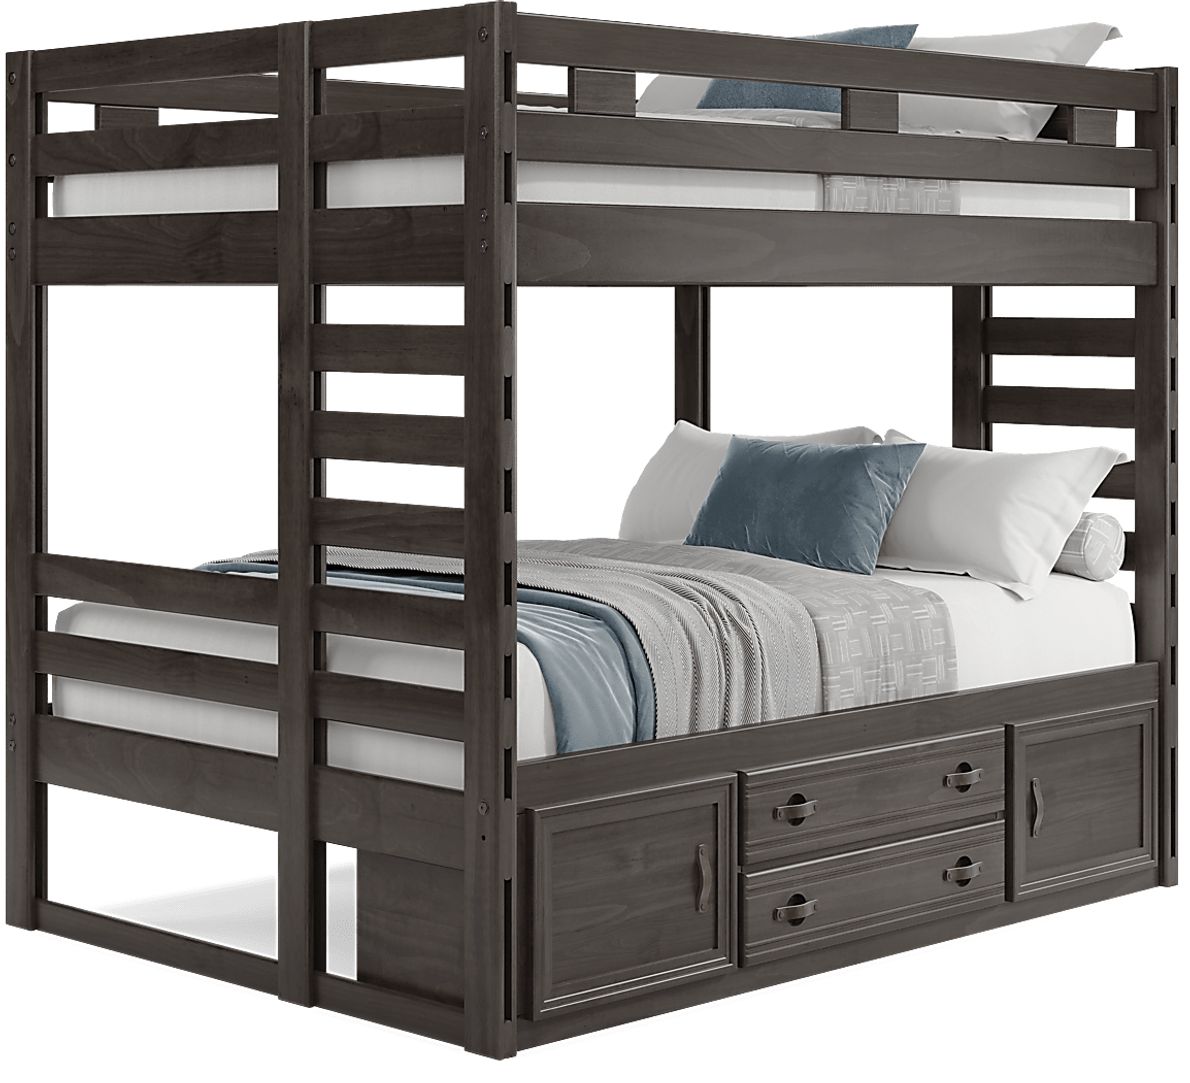 Kids Creekside 2.0 Charcoal Full/Full Bunk Bed with Storage Rail